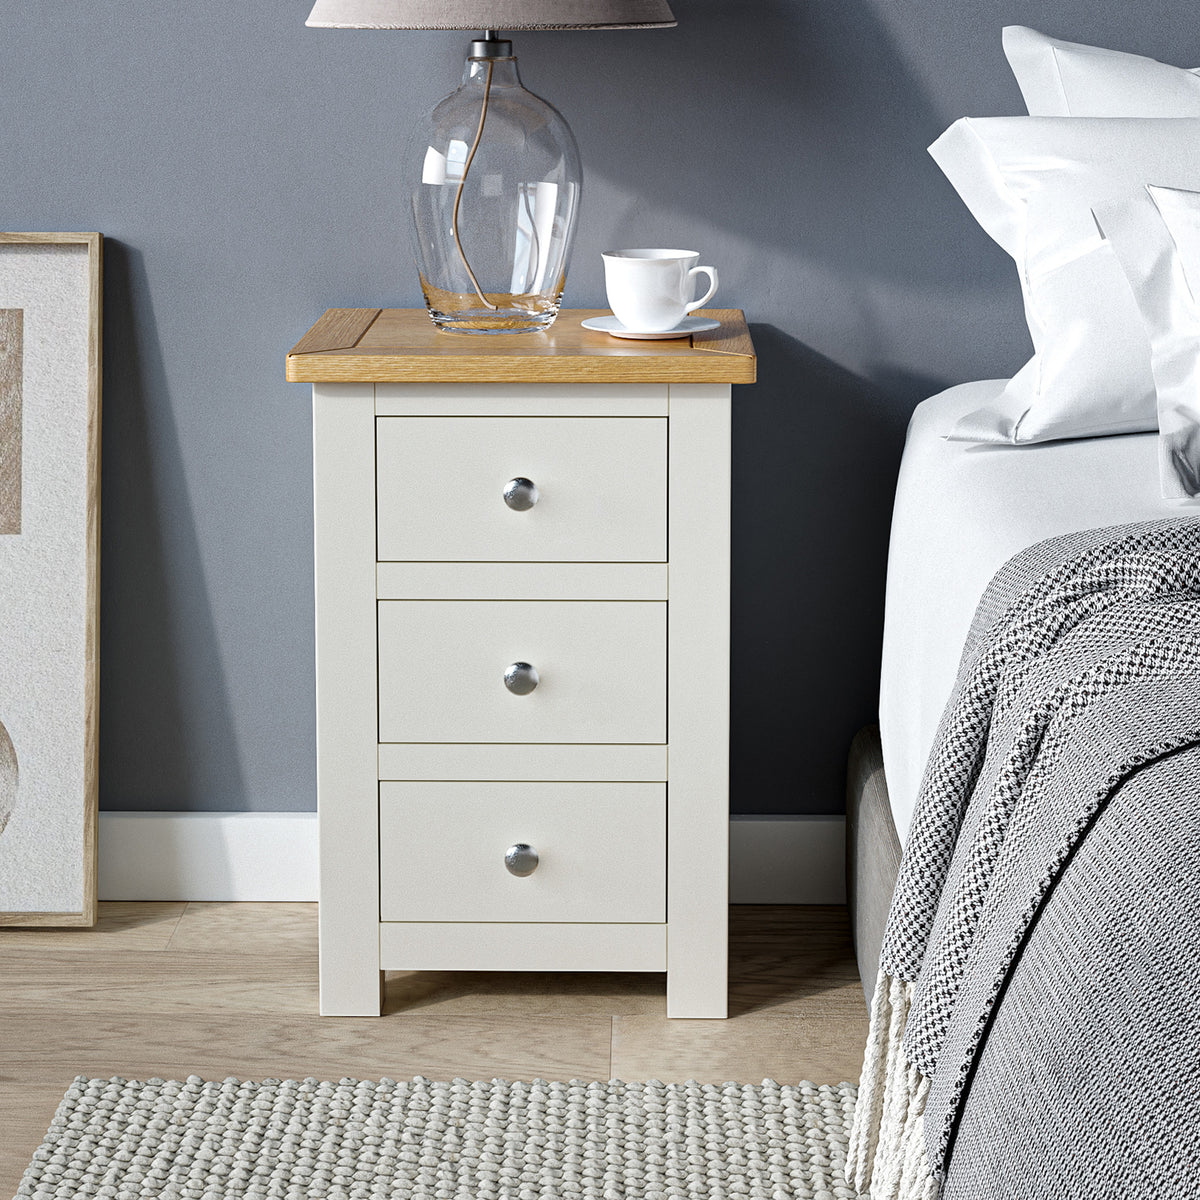 Duchy Line Cream 3 Drawer Bedside Table with Oak Top for bedroom